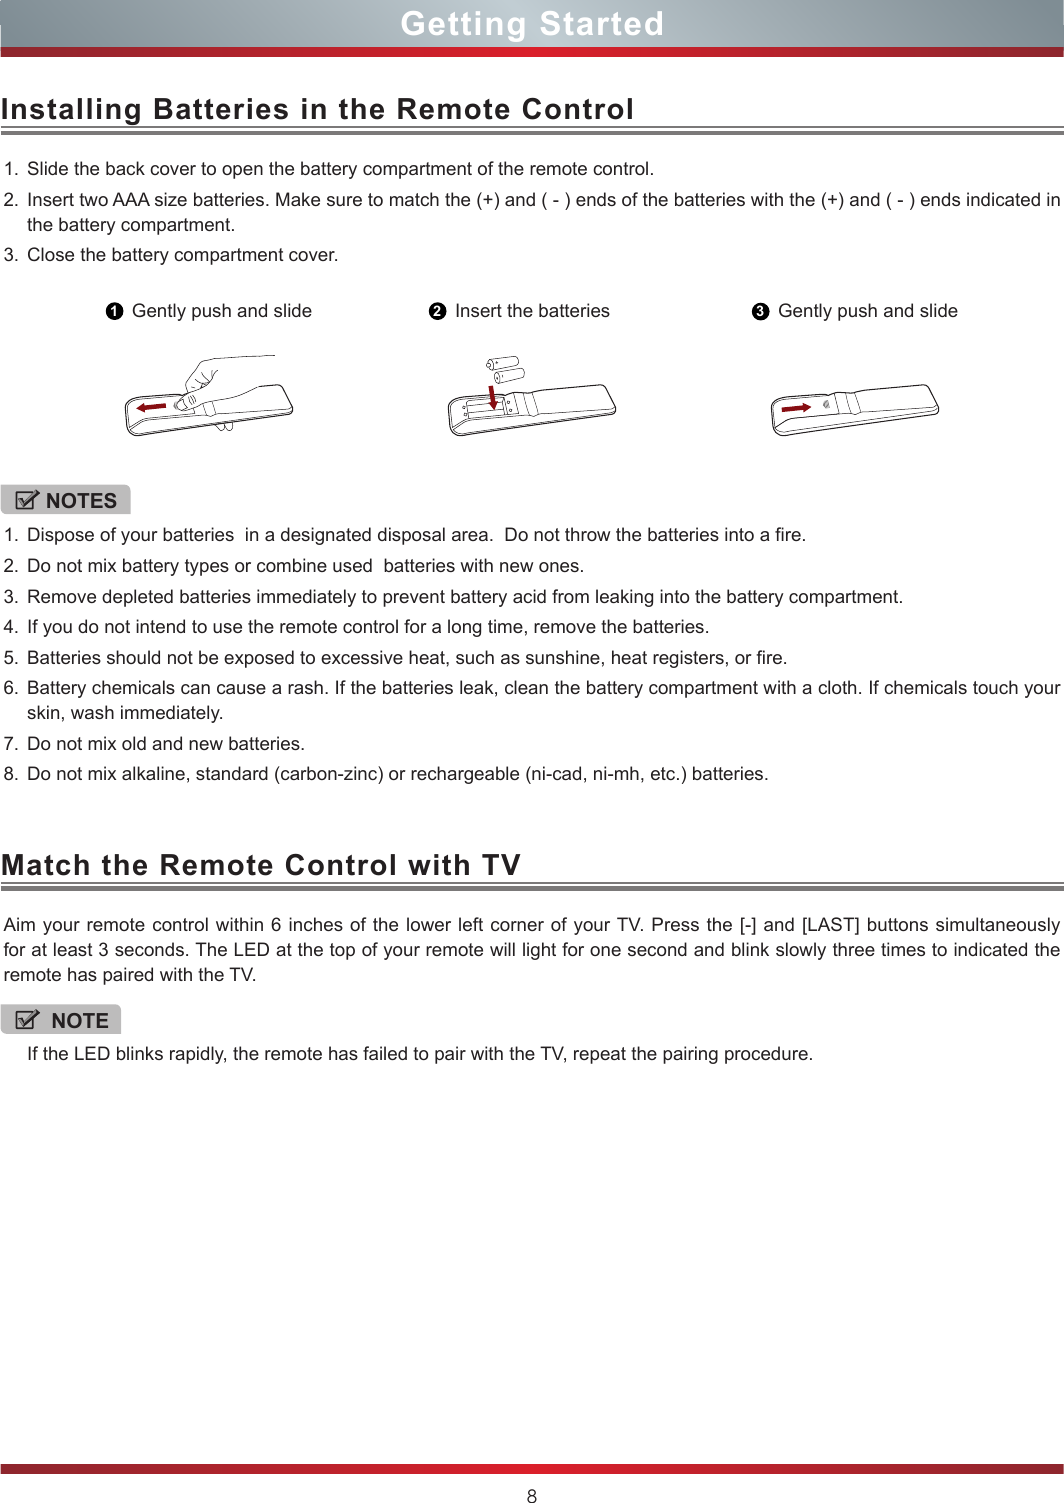 8Installing Batteries in the Remote ControlMatch the Remote Control with TVGetting StartedNOTEIf the LED blinks rapidly, the remote has failed to pair with the TV, repeat the pairing procedure.1. Slide the back cover to open the battery compartment of the remote control. 2. Insert two AAA size batteries. Make sure to match the (+) and ( - ) ends of the batteries with the (+) and ( - ) ends indicated in the battery compartment.3. Close the battery compartment cover.Aim your remote control within 6 inches of the lower left corner of your TV. Press the [-] and [LAST] buttons simultaneously for at least 3 seconds. The LED at the top of your remote will light for one second and blink slowly three times to indicated the remote has paired with the TV. 1Gently push and slide 2Insert the batteries 3Gently push and slideNOTES1. Dispose of your batteries  in a designated disposal area.  Do not throw the batteries into a fire.2. Do not mix battery types or combine used  batteries with new ones.3. Remove depleted batteries immediately to prevent battery acid from leaking into the battery compartment.4. If you do not intend to use the remote control for a long time, remove the batteries.5. Batteries should not be exposed to excessive heat, such as sunshine, heat registers, or fire.6. Battery chemicals can cause a rash. If the batteries leak, clean the battery compartment with a cloth. If chemicals touch your skin, wash immediately.7. Do not mix old and new batteries.8. Do not mix alkaline, standard (carbon-zinc) or rechargeable (ni-cad, ni-mh, etc.) batteries.